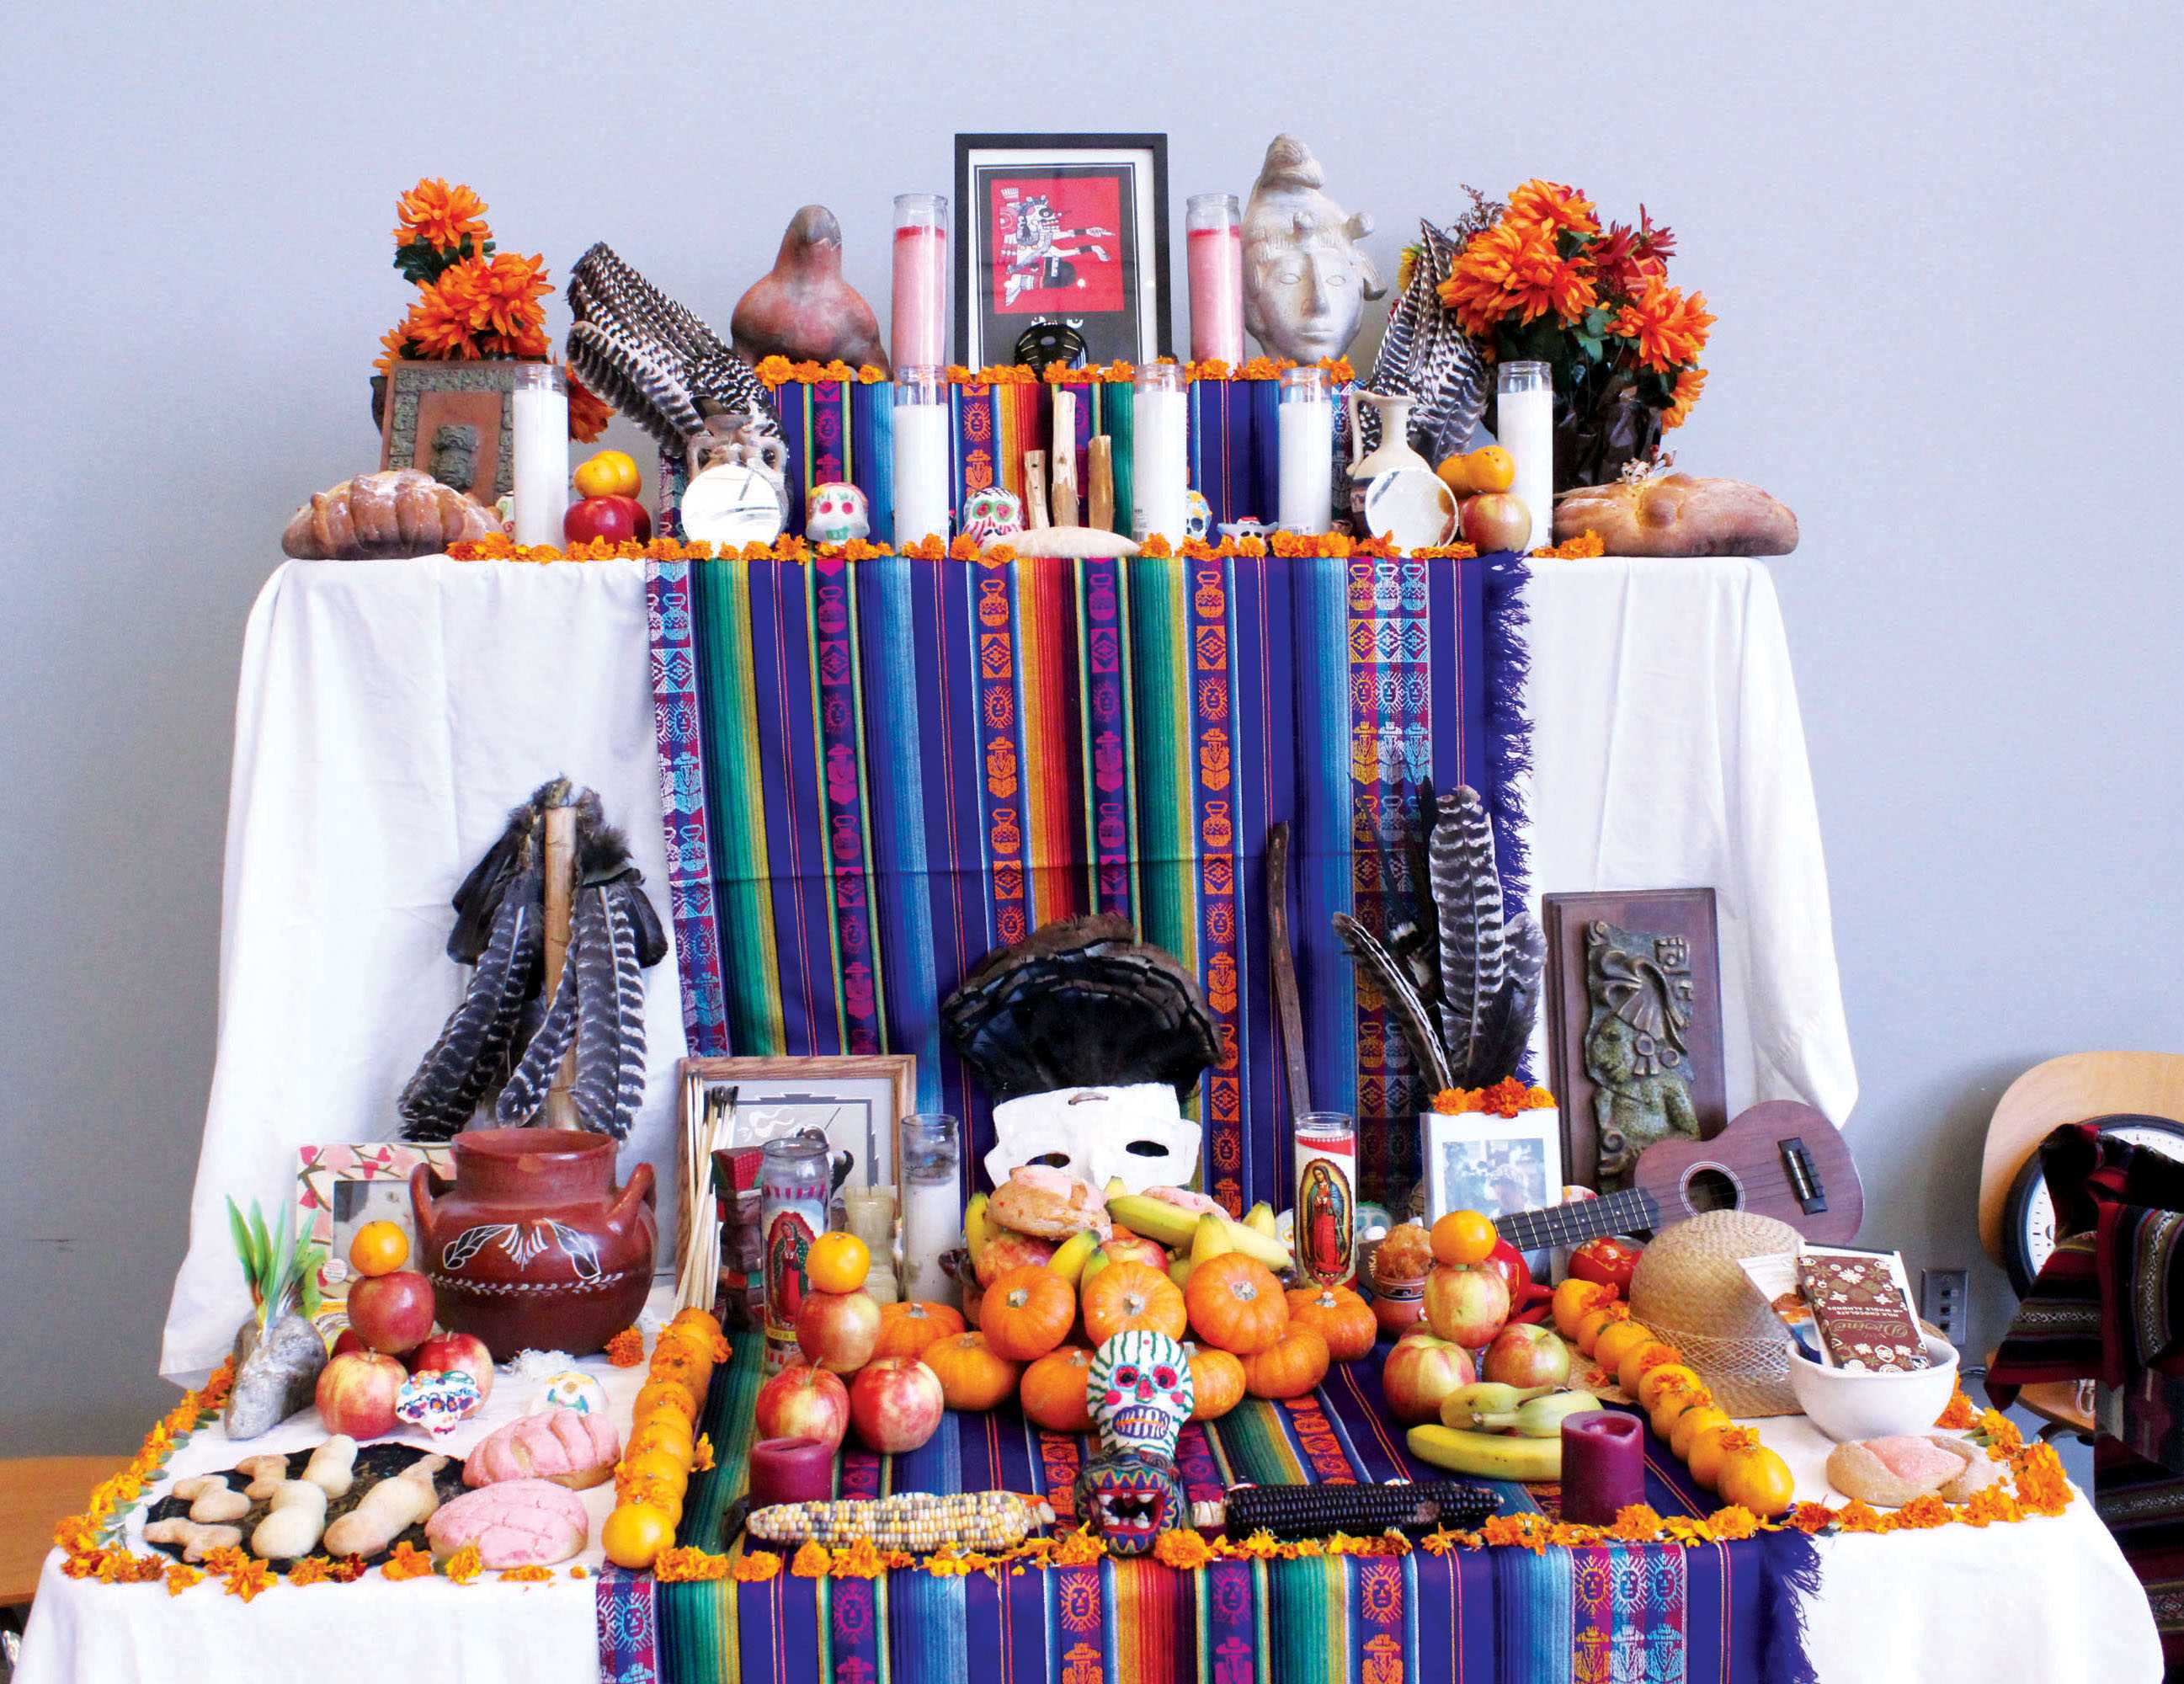 This altar celebrates both death and life.